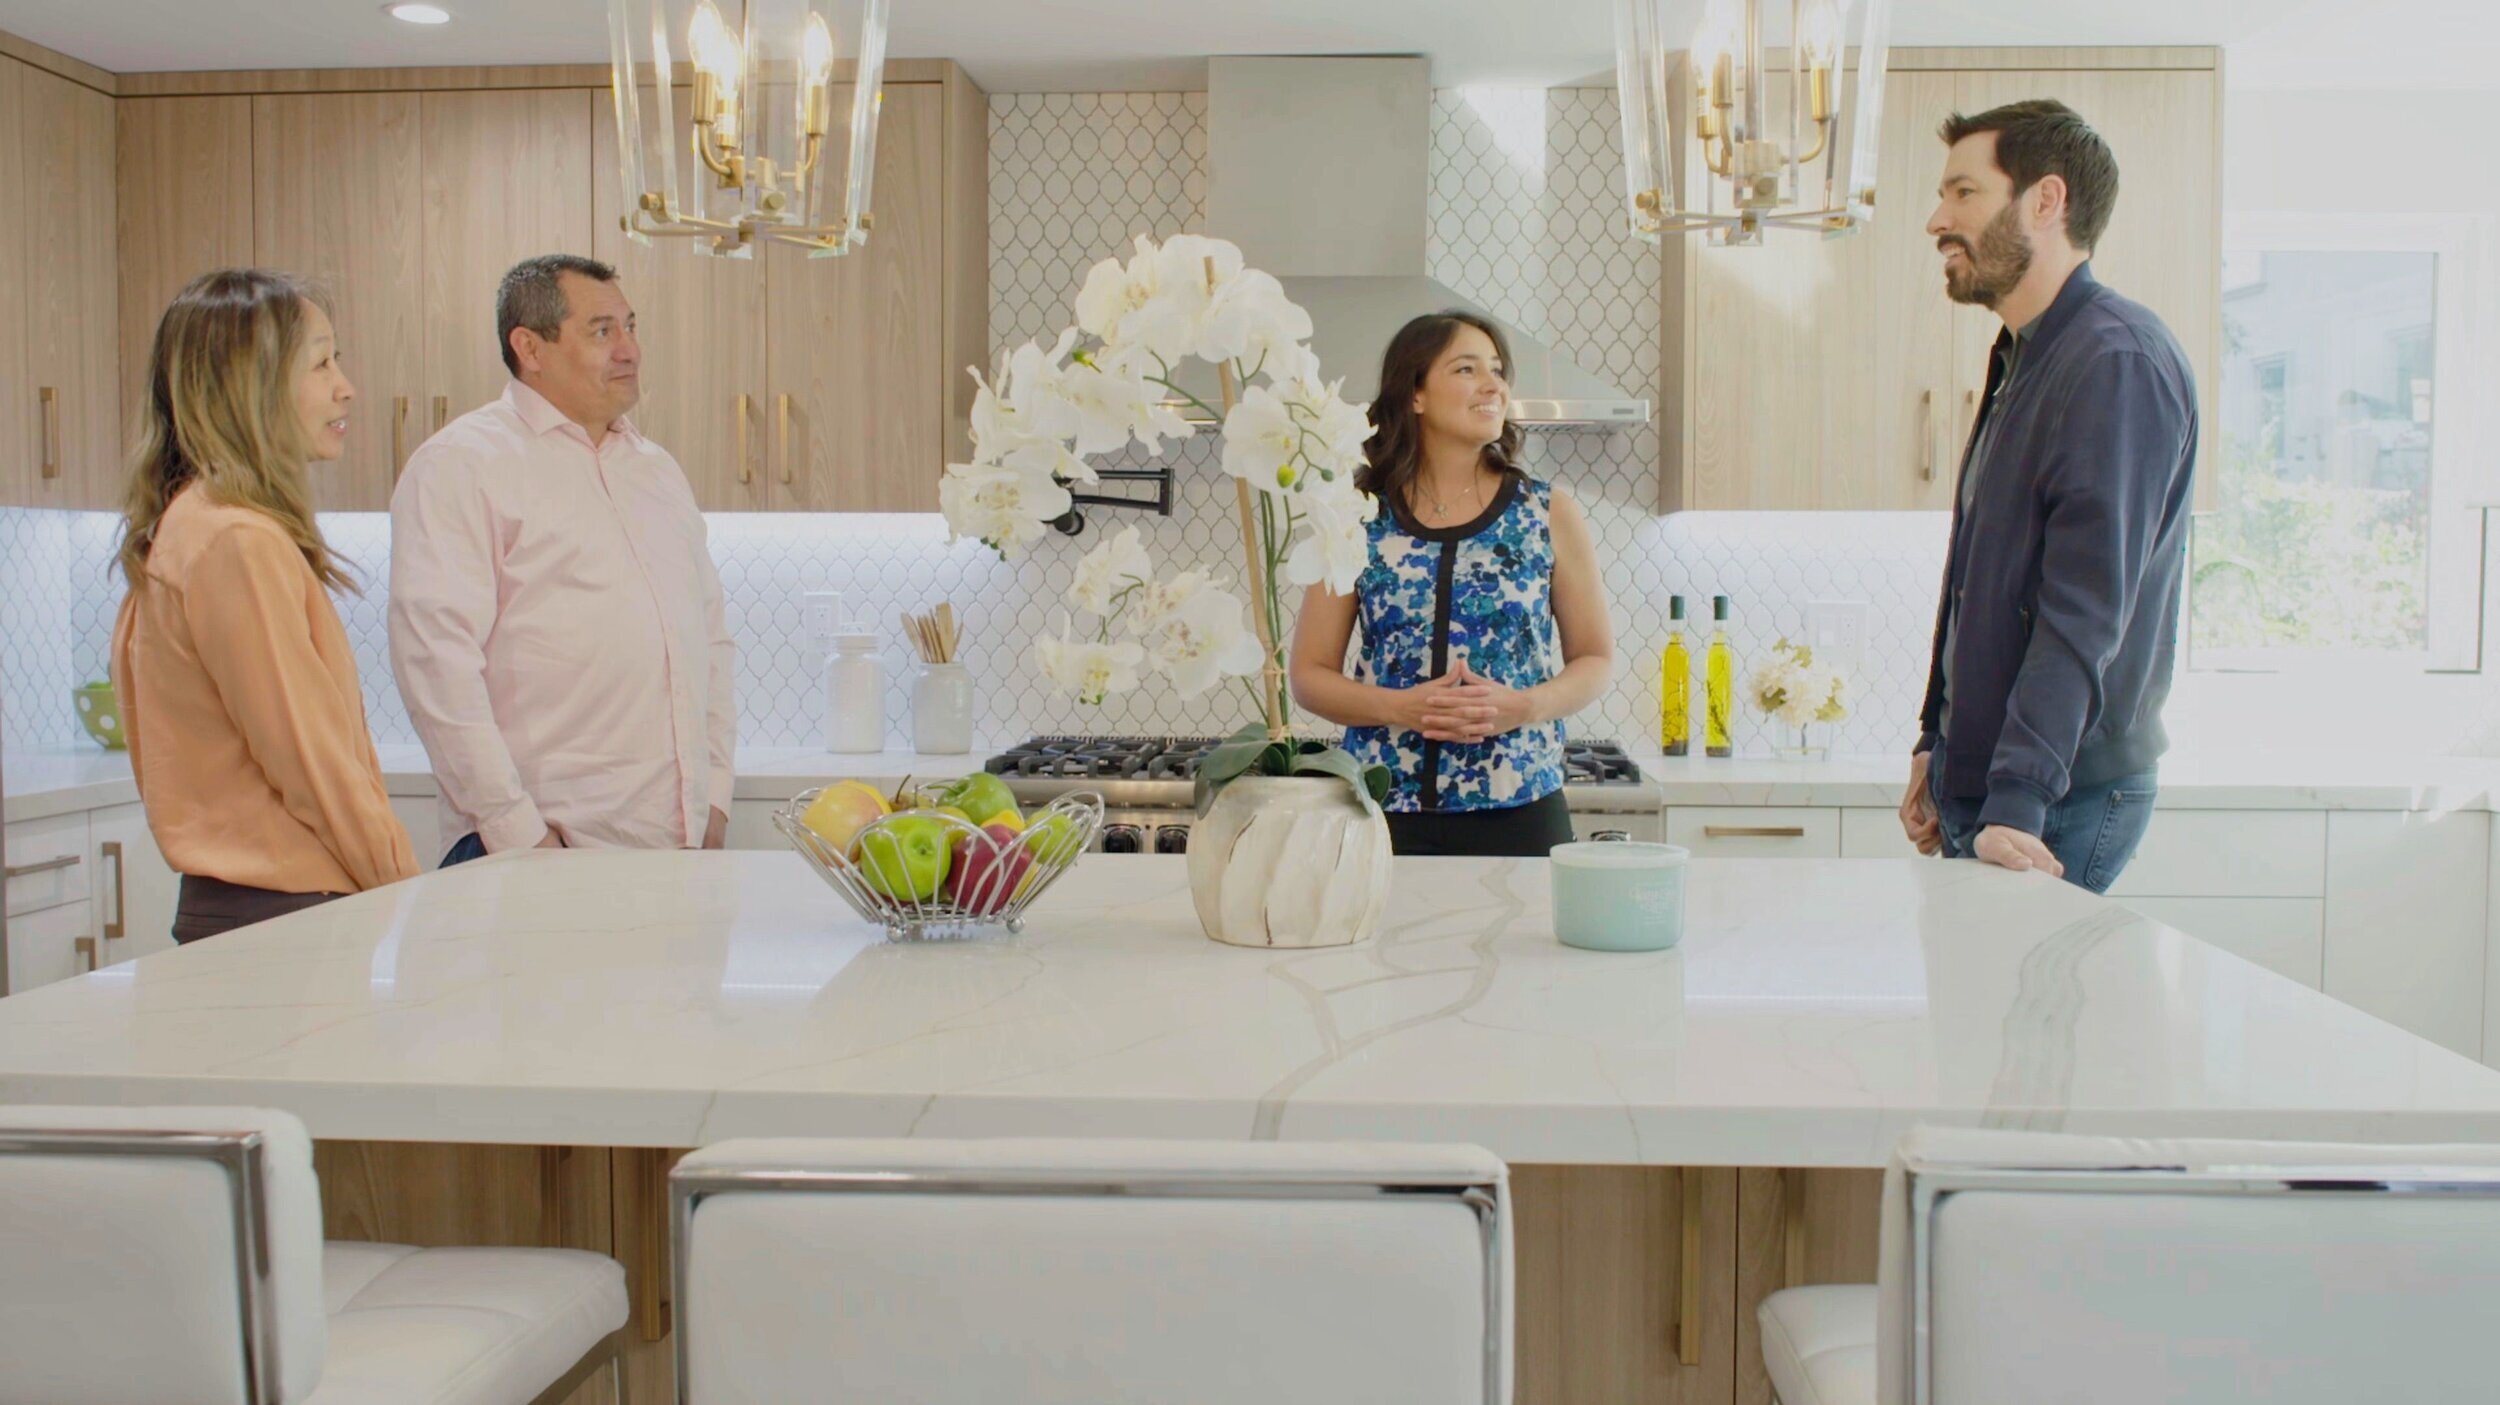 Property Brothers Forever Home: Season 5 Go With The Flow Episode June 9th, 2021